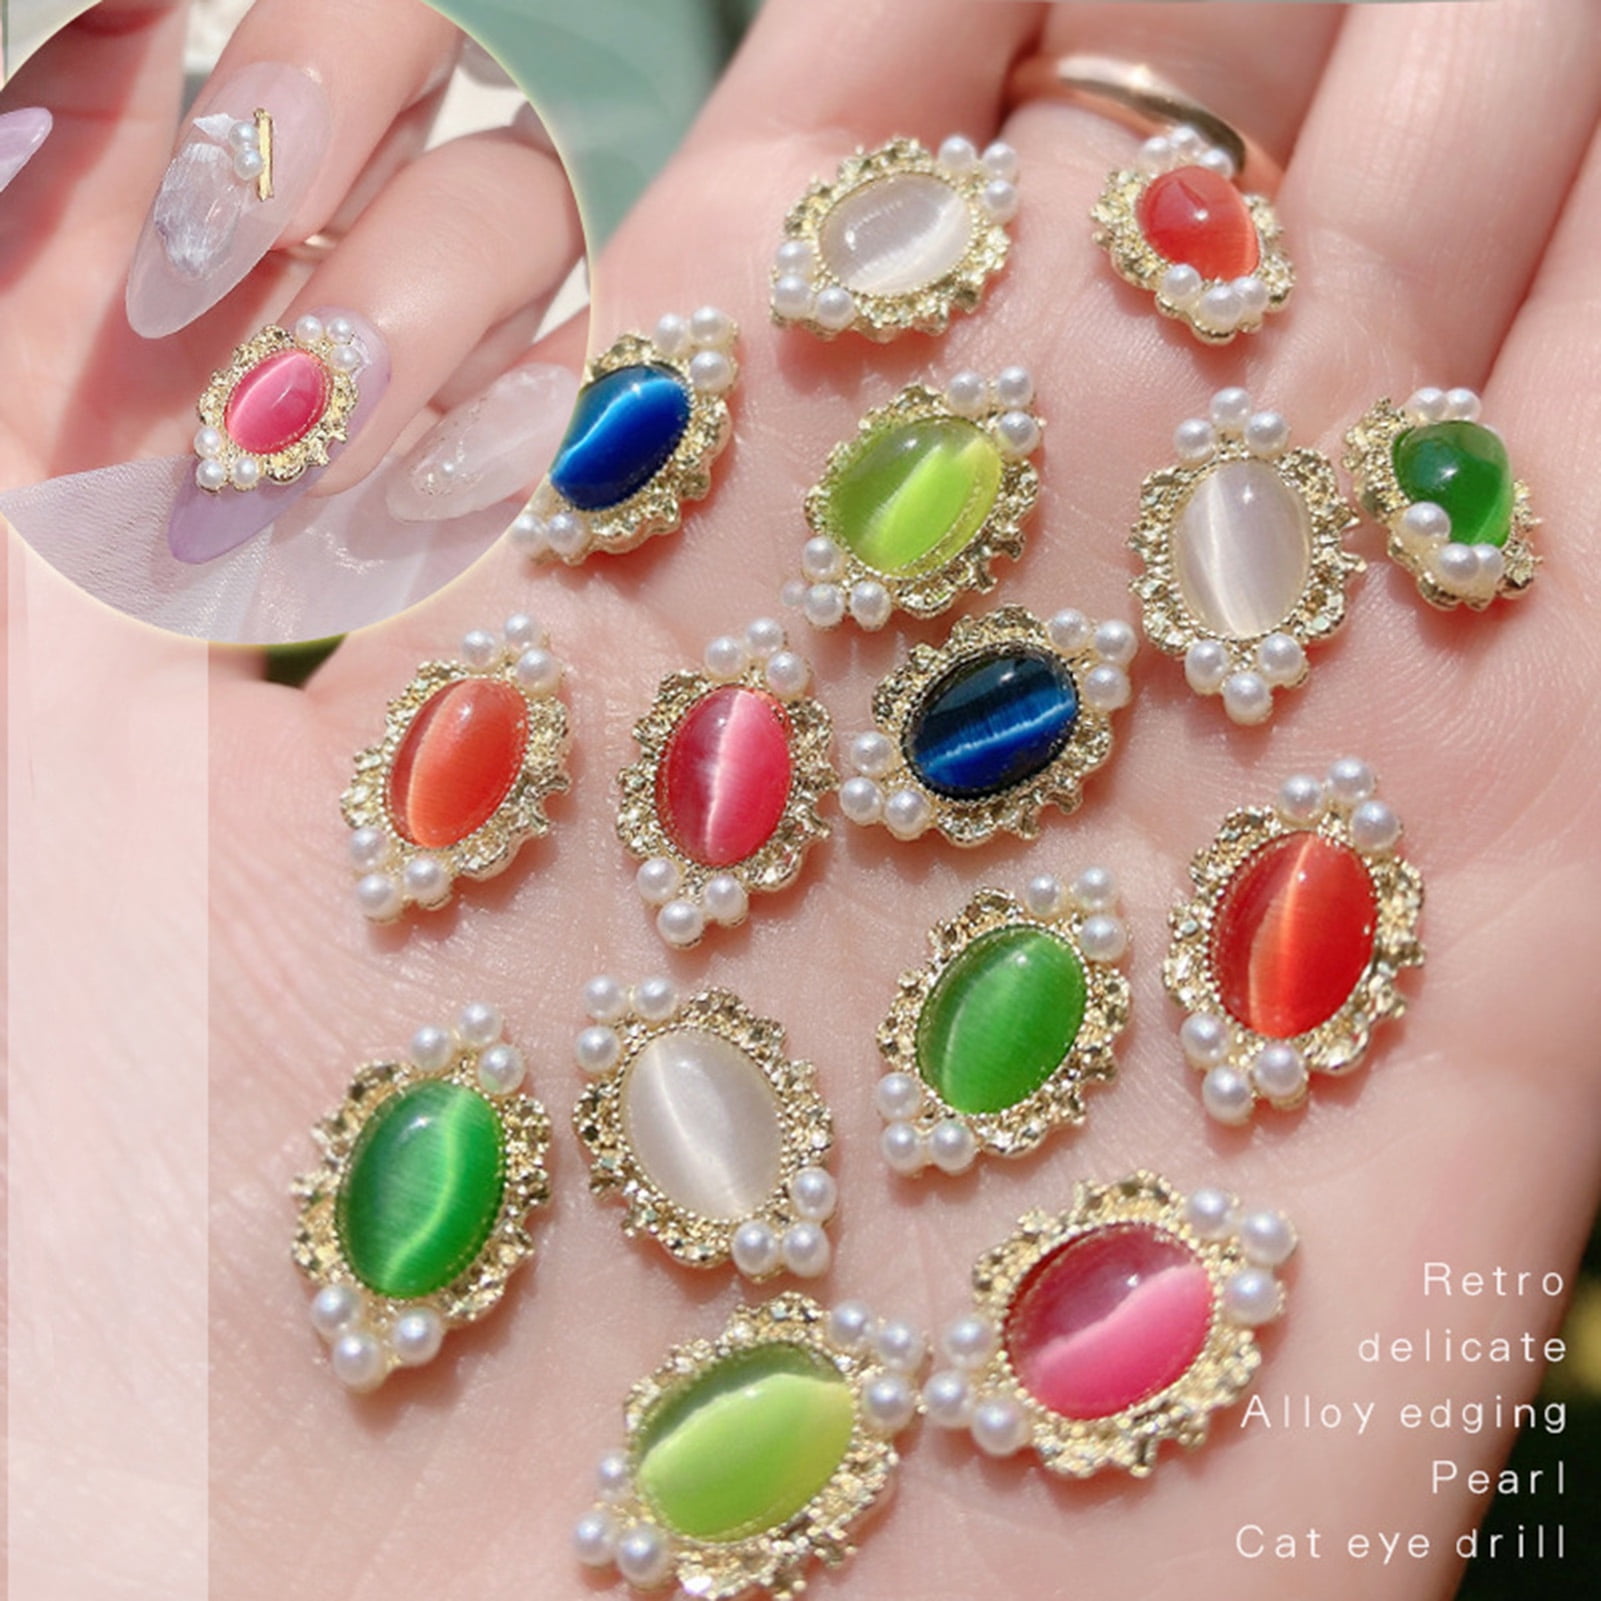 UDIYO Nail Decoration Exquisite DIY Lightweight Elf Large Small Rhinestones  Mixed Accessories for Women